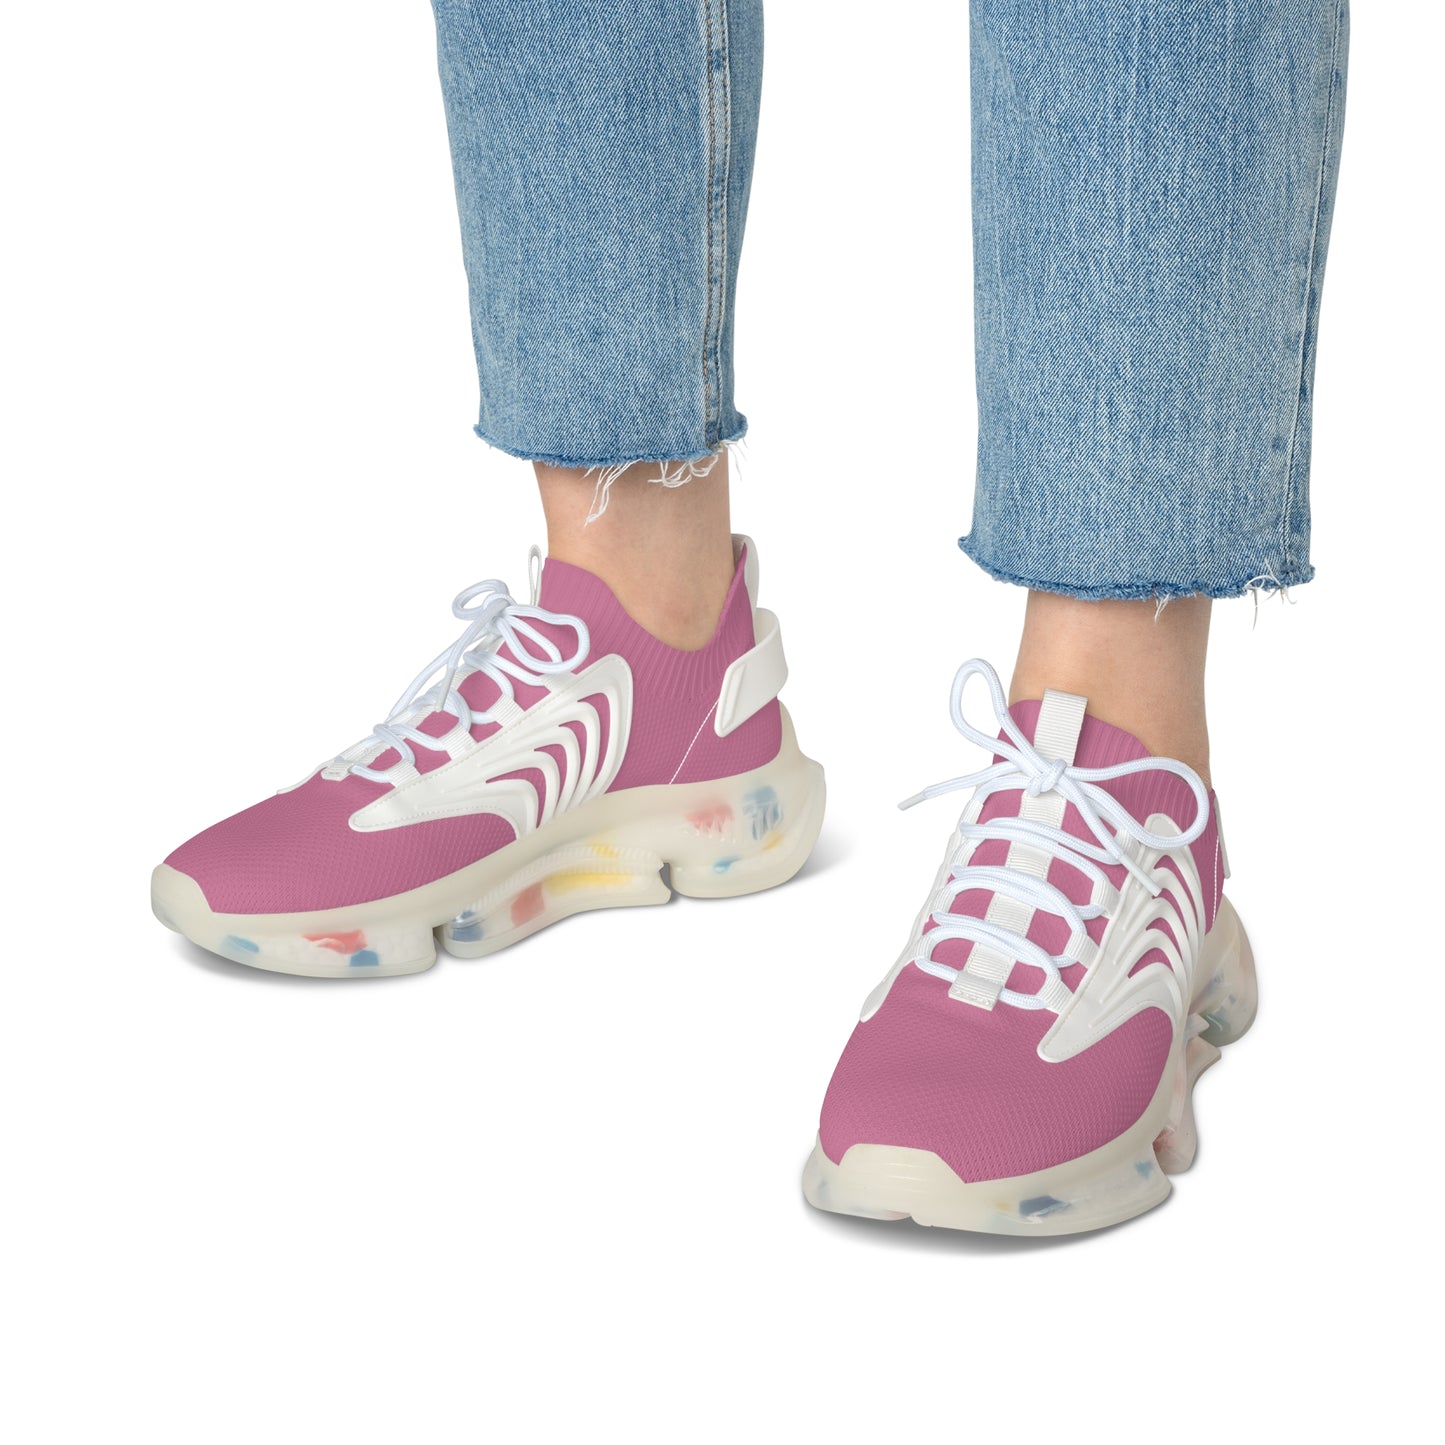 CH Candyfloss Pink Women's Mesh Sneakers